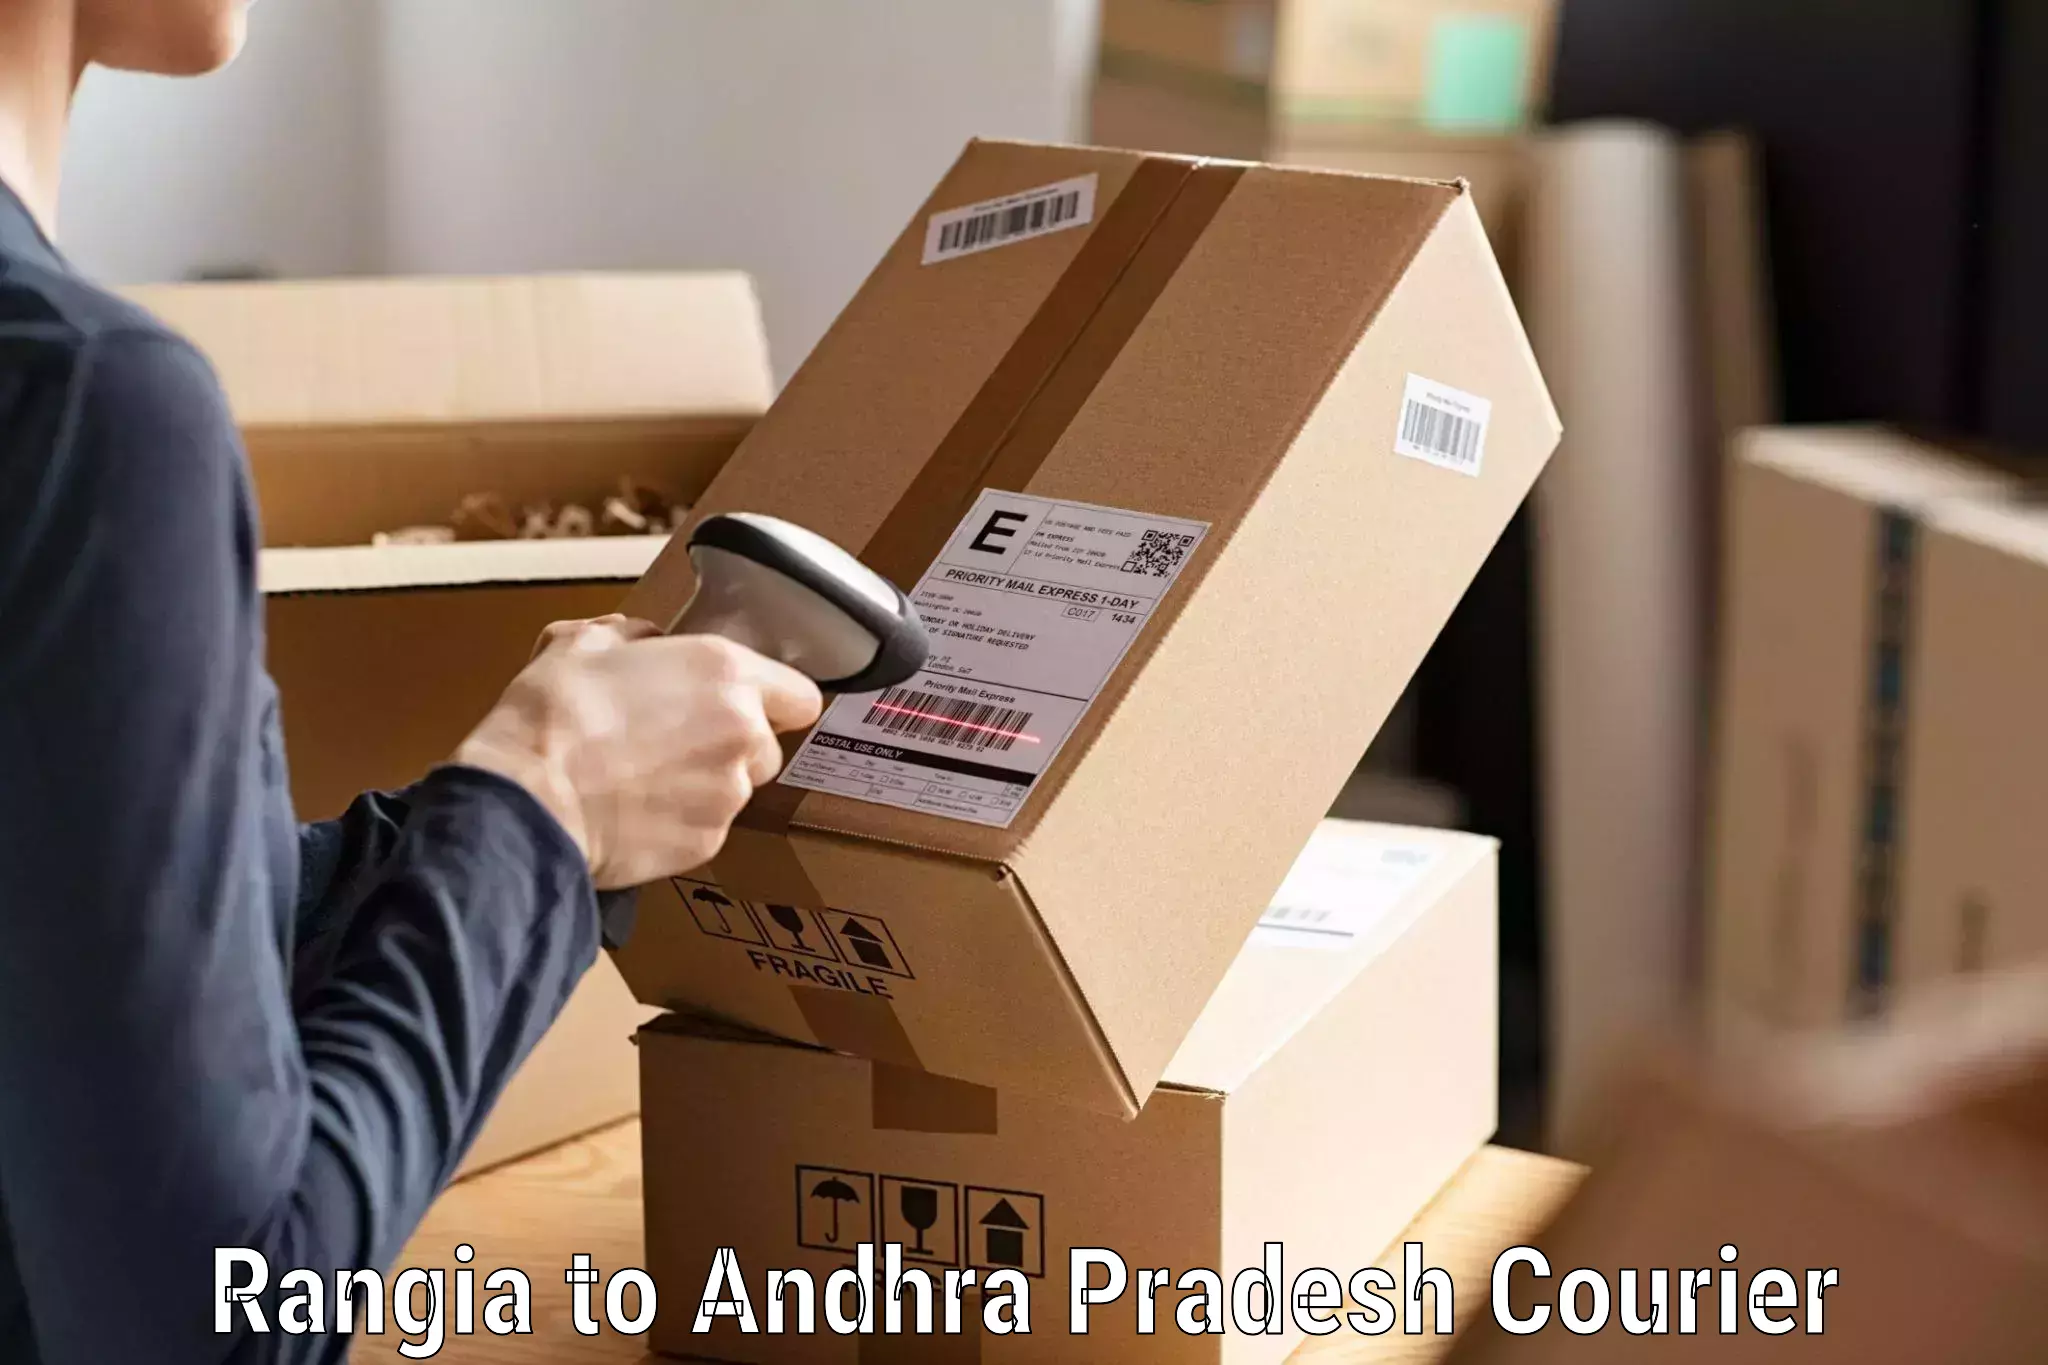 Dynamic parcel delivery in Rangia to Visakhapatnam Port